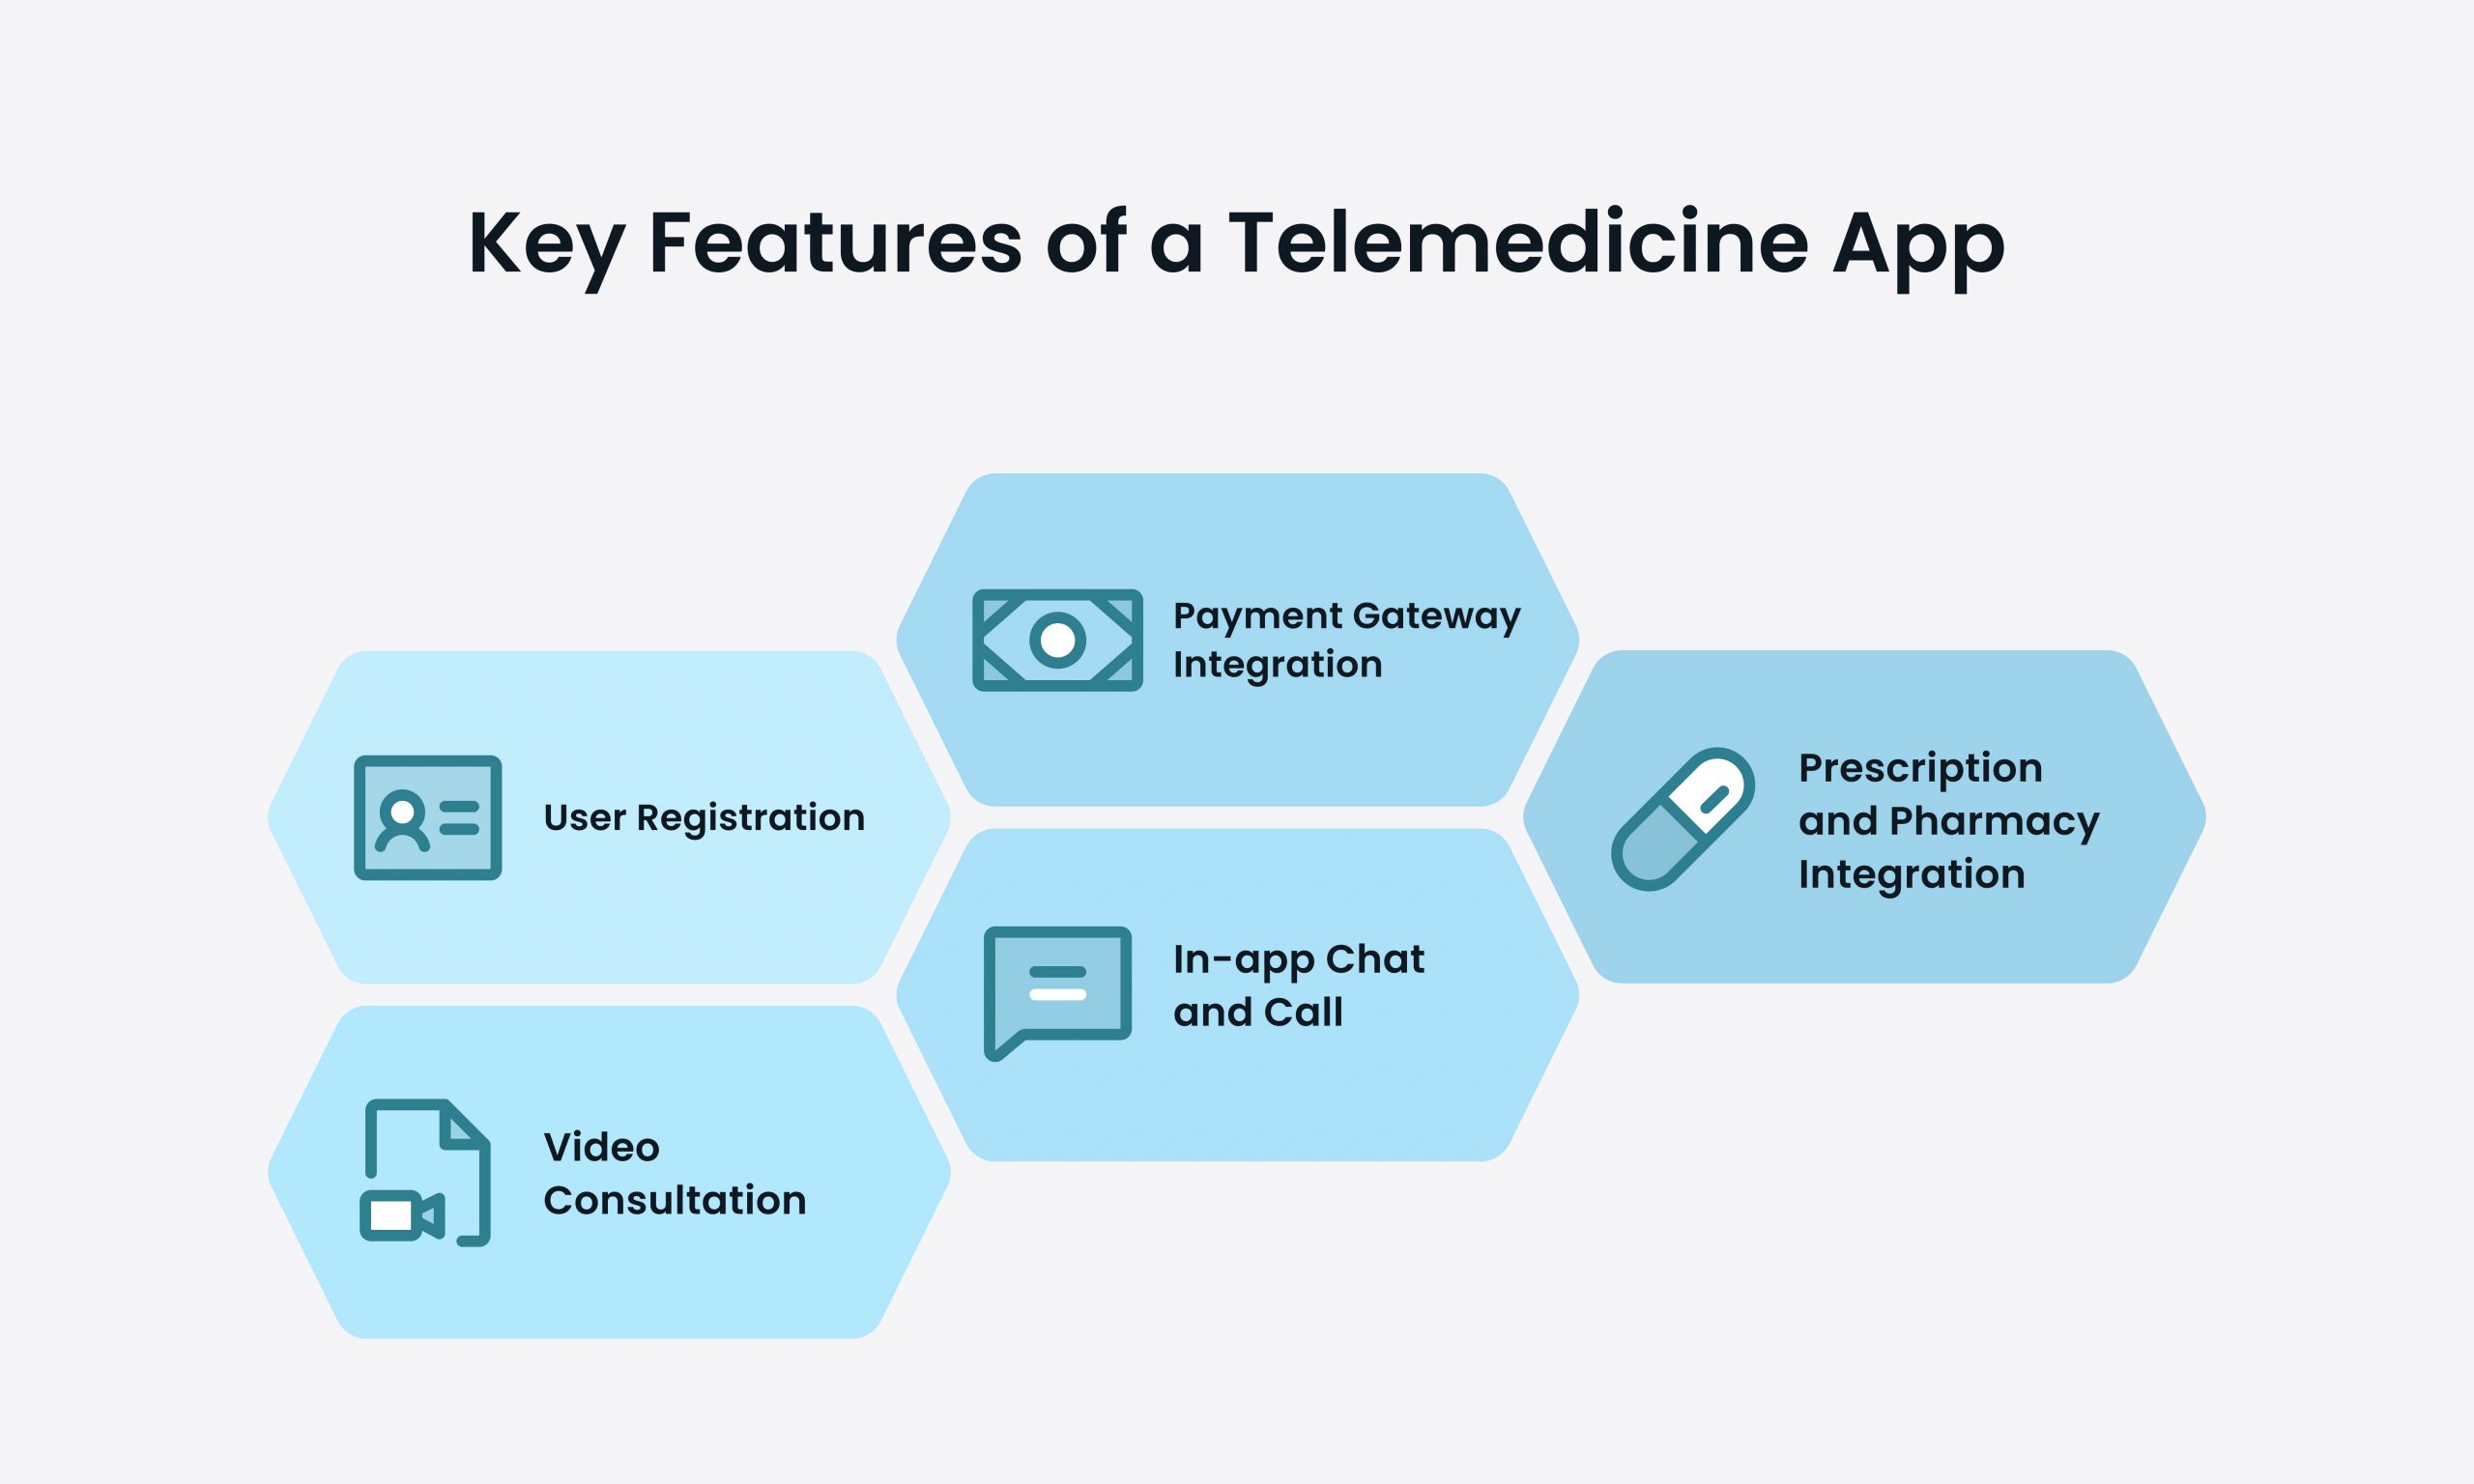 Key Features of a Telemedicine App: User Registration, Video Consultation, Prescription and Pharmacy Integration, In-app Chat and Call, Payment Gateway Integration